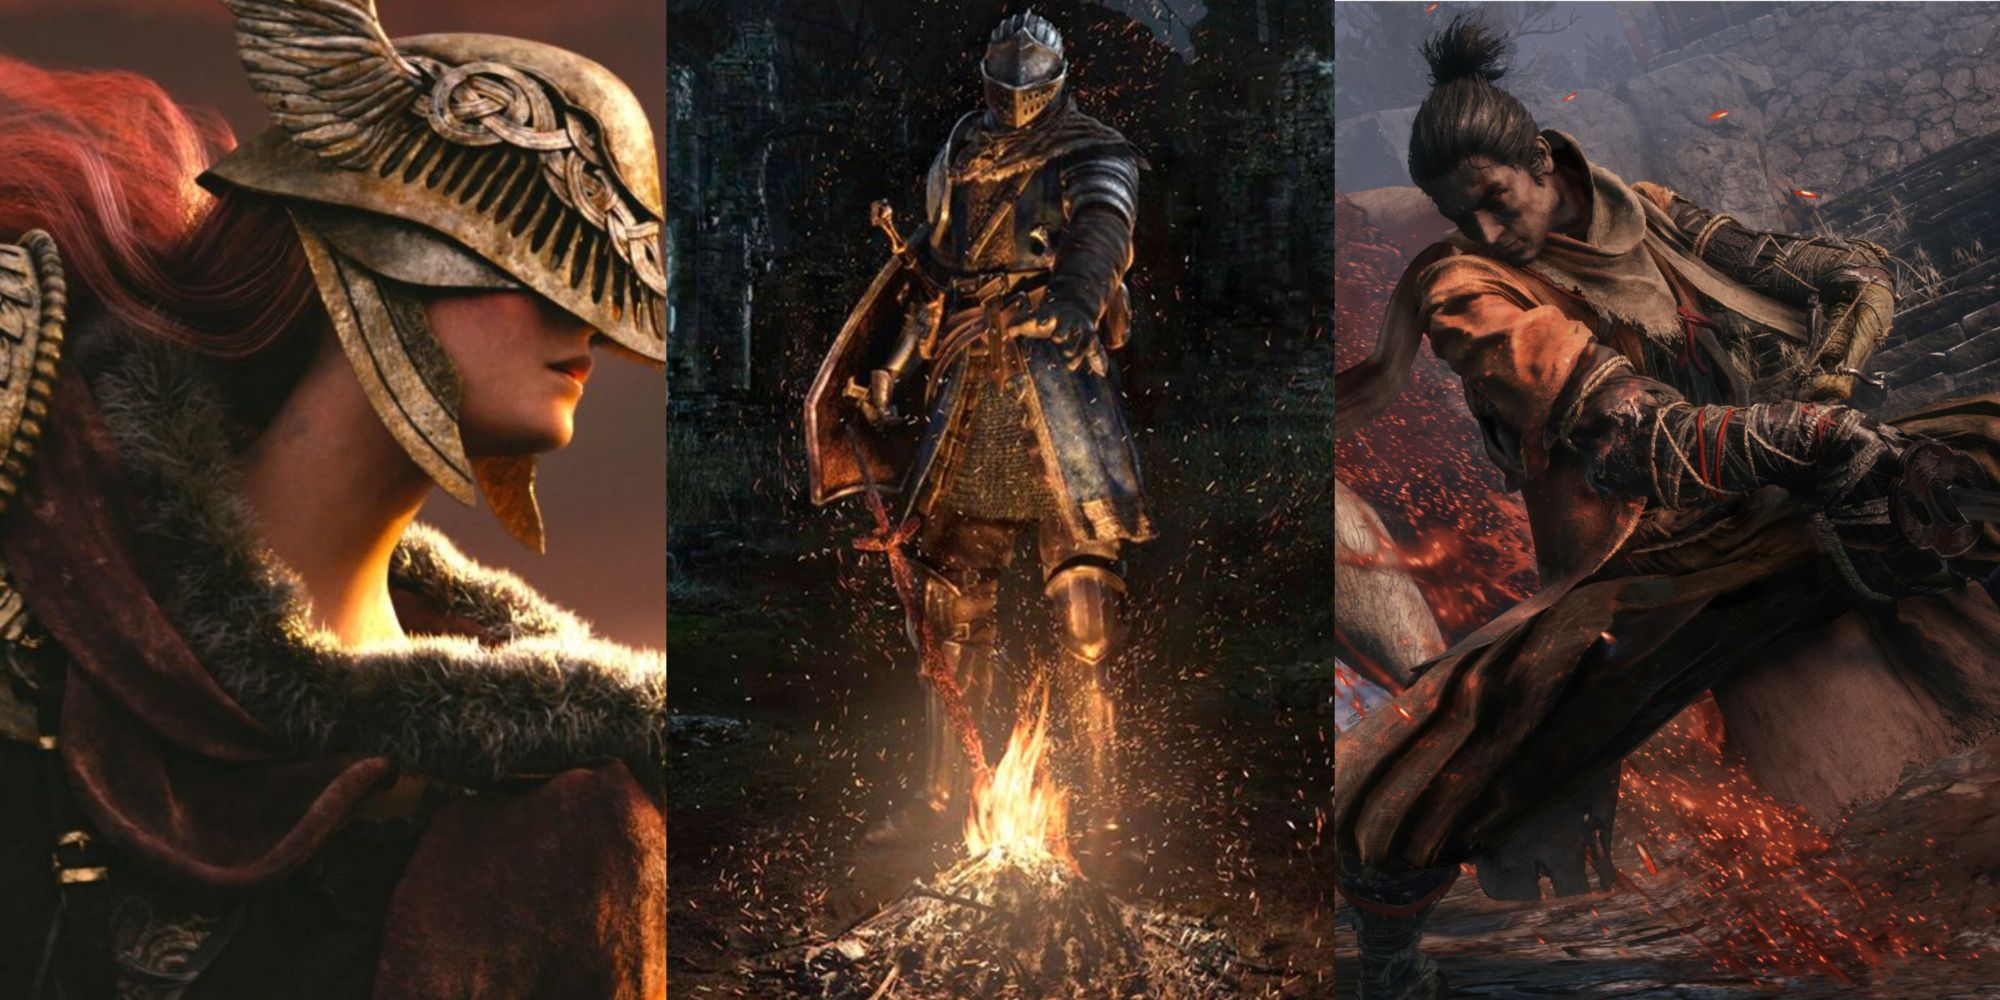 Ranking EVERY Modern From Software Game WORST TO BEST (Soulsborne